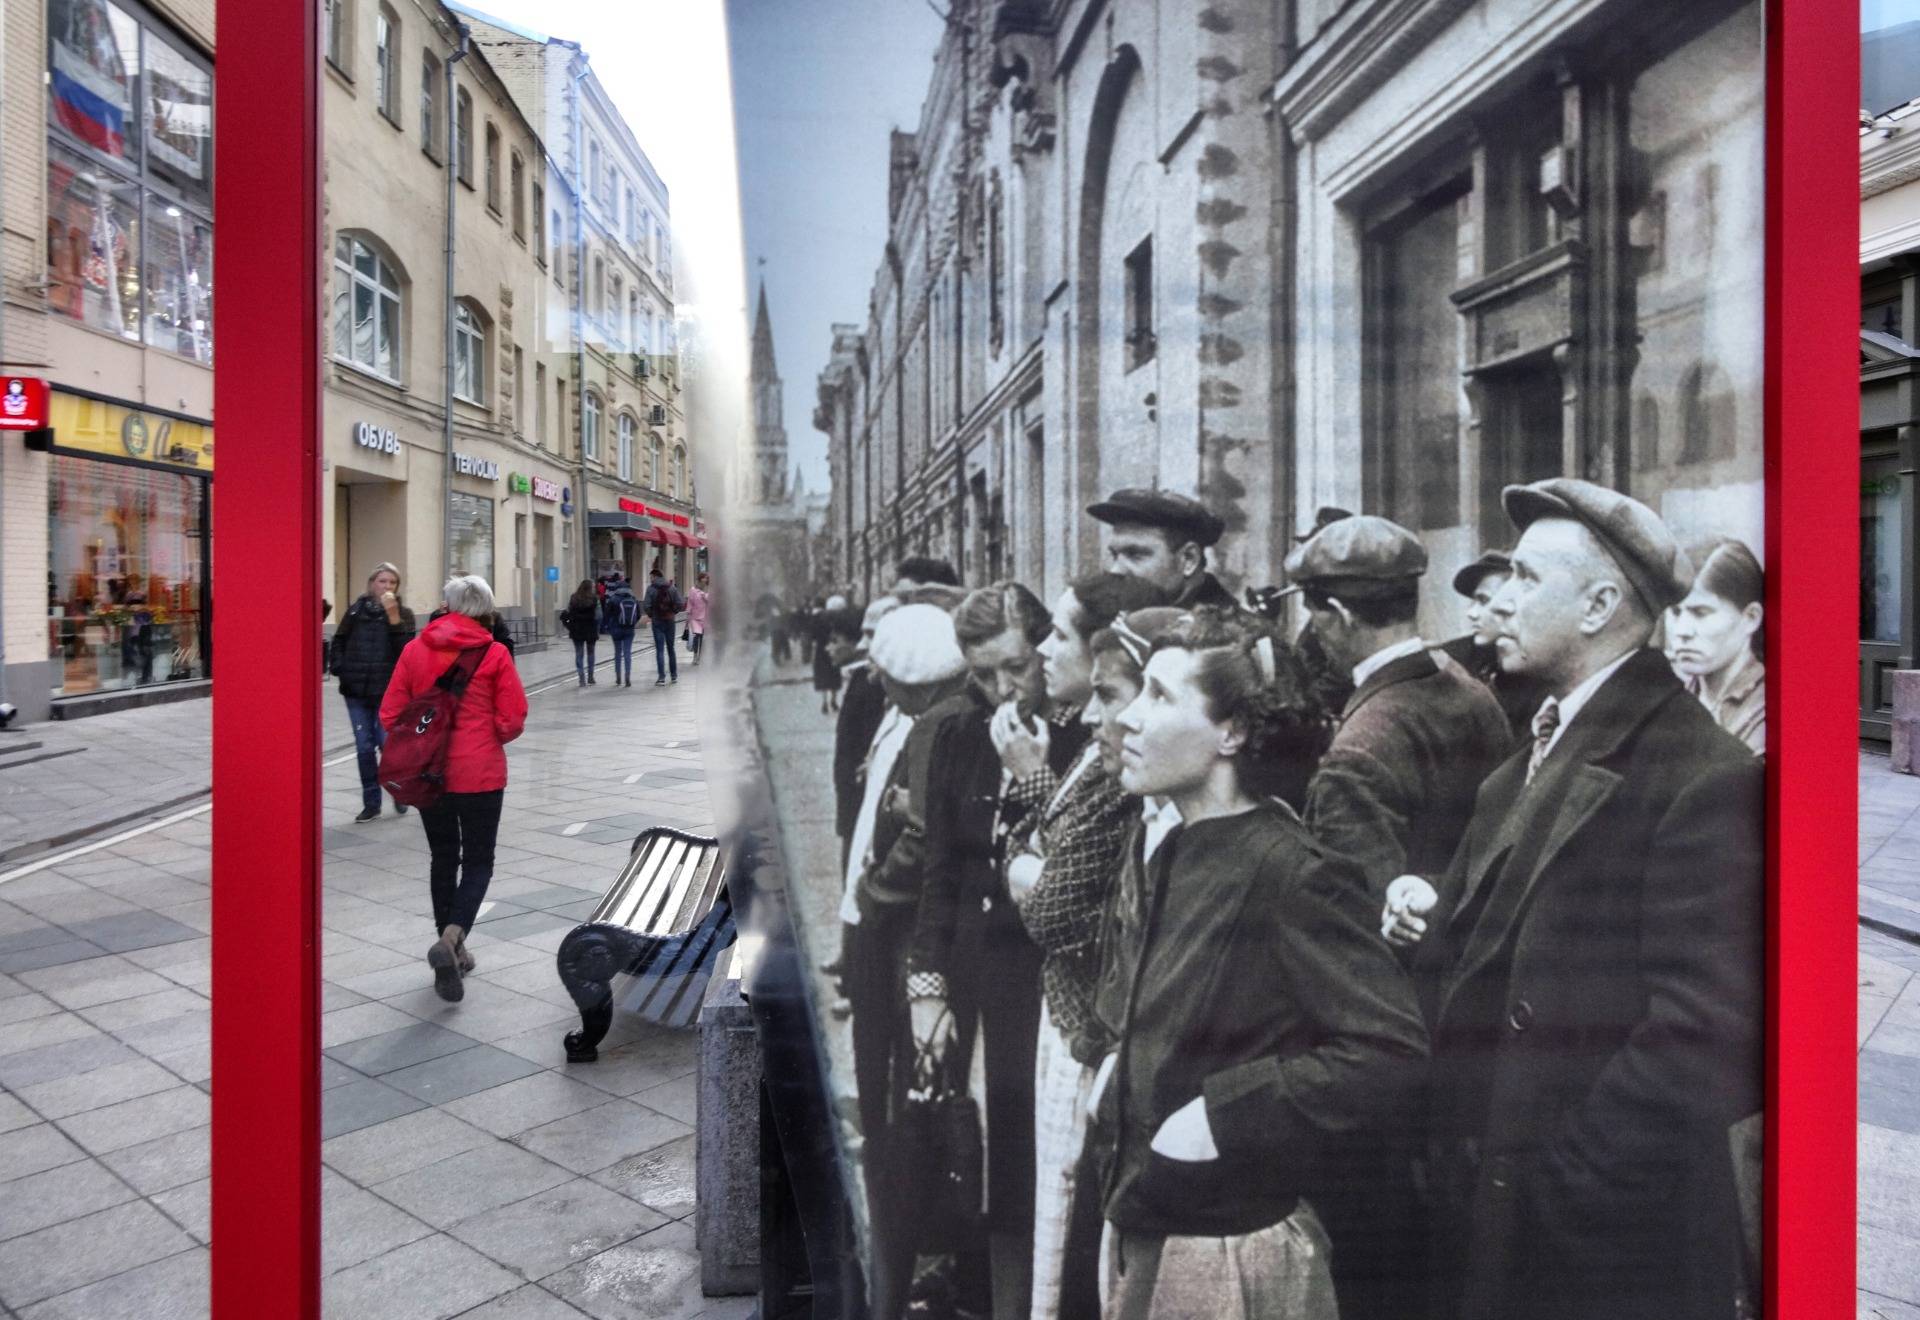 On the right an old picture from the WW2, framed in a moscow street witk the reality